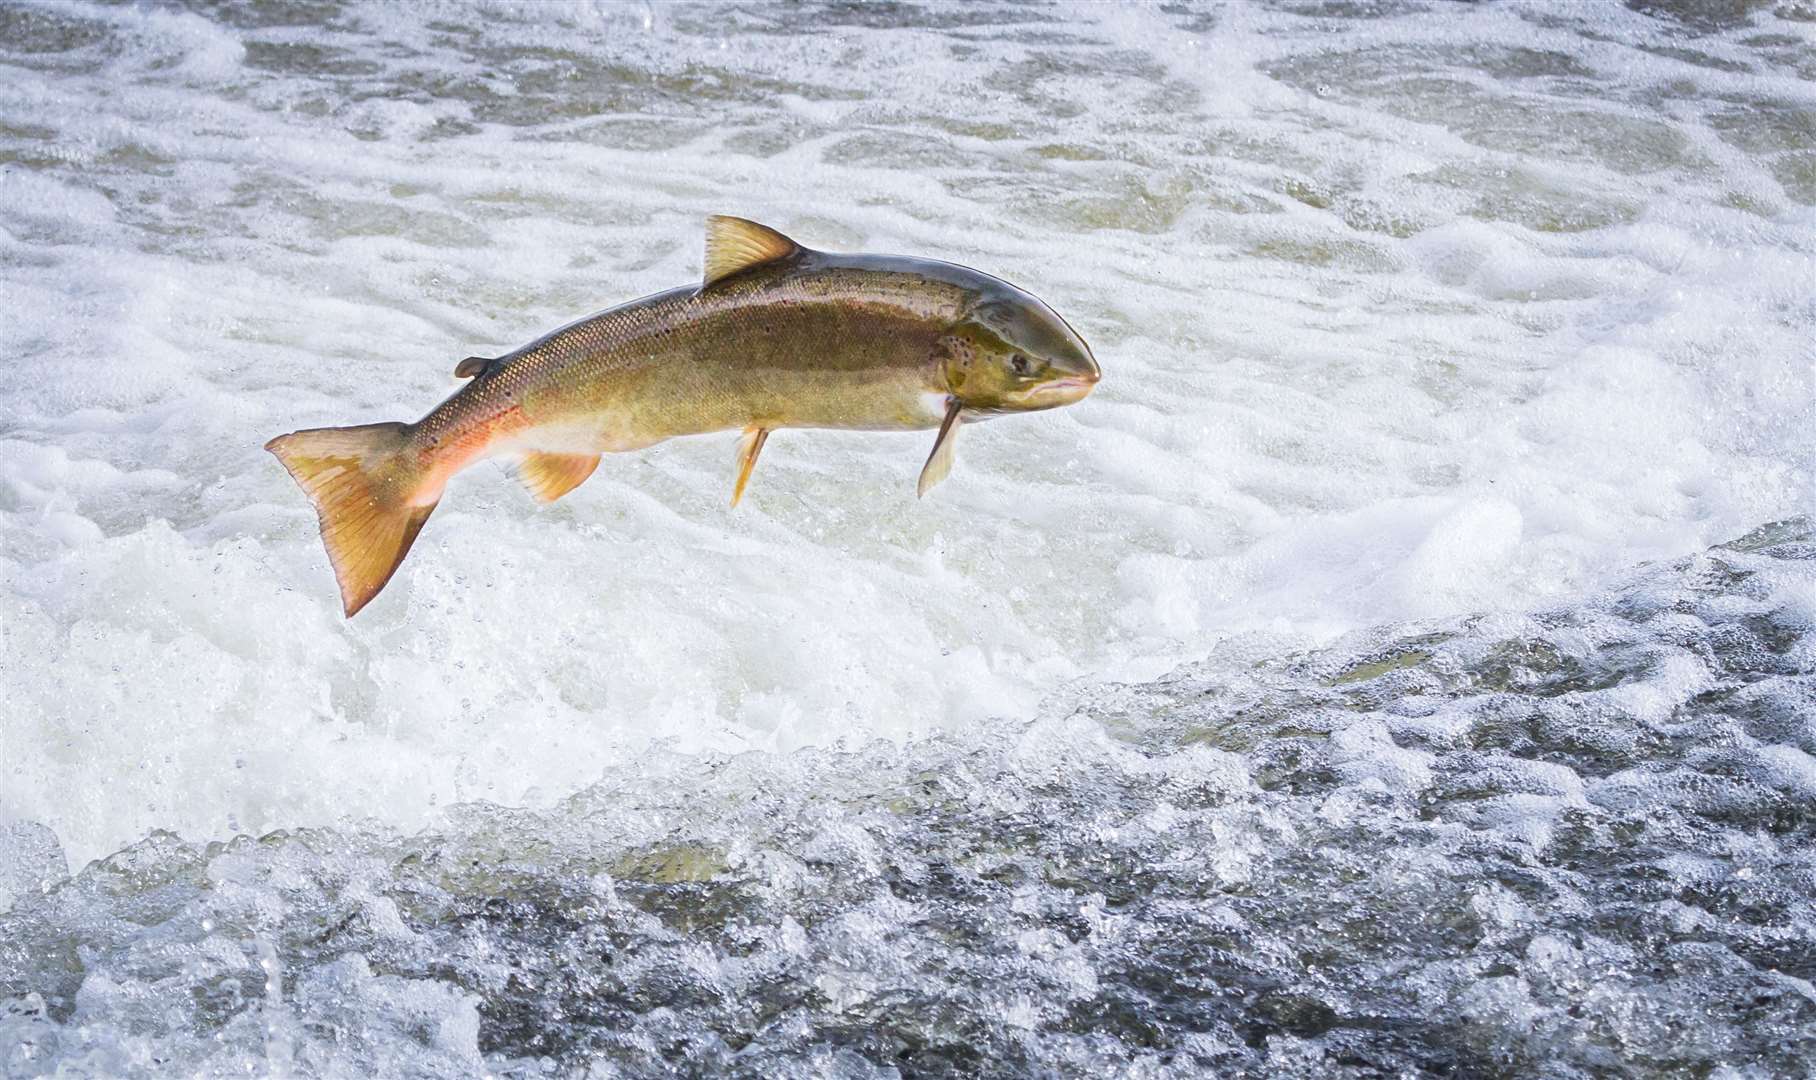 An Atlantic salmon (Salmo salar) jumps out of the water.